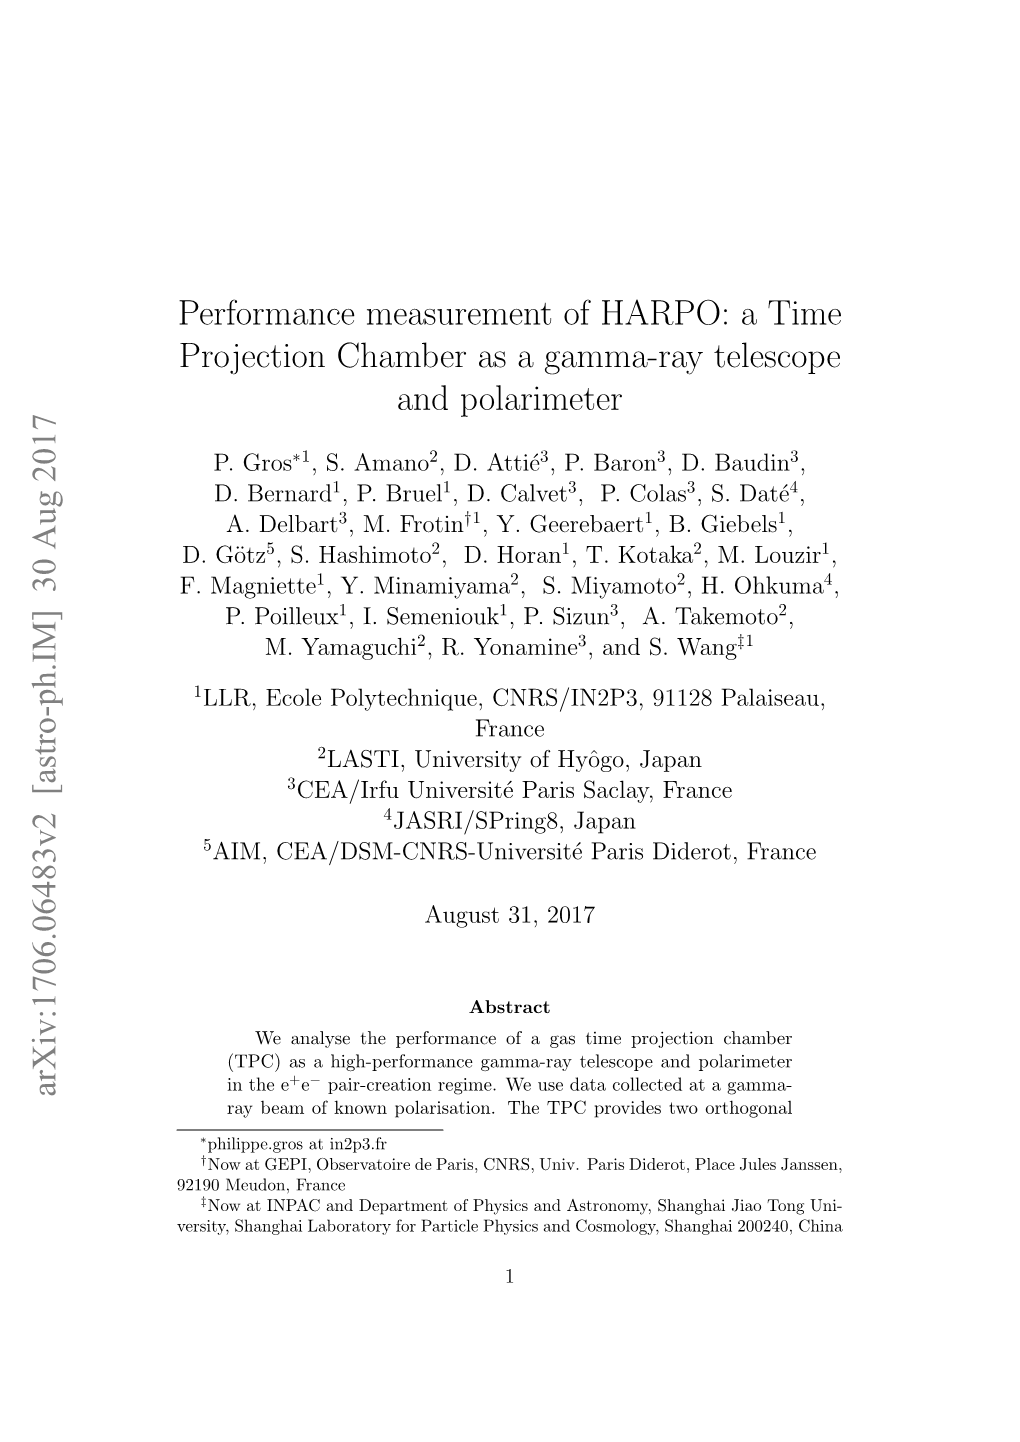 A Time Projection Chamber As a Gamma-Ray Telescope and Polarimeter